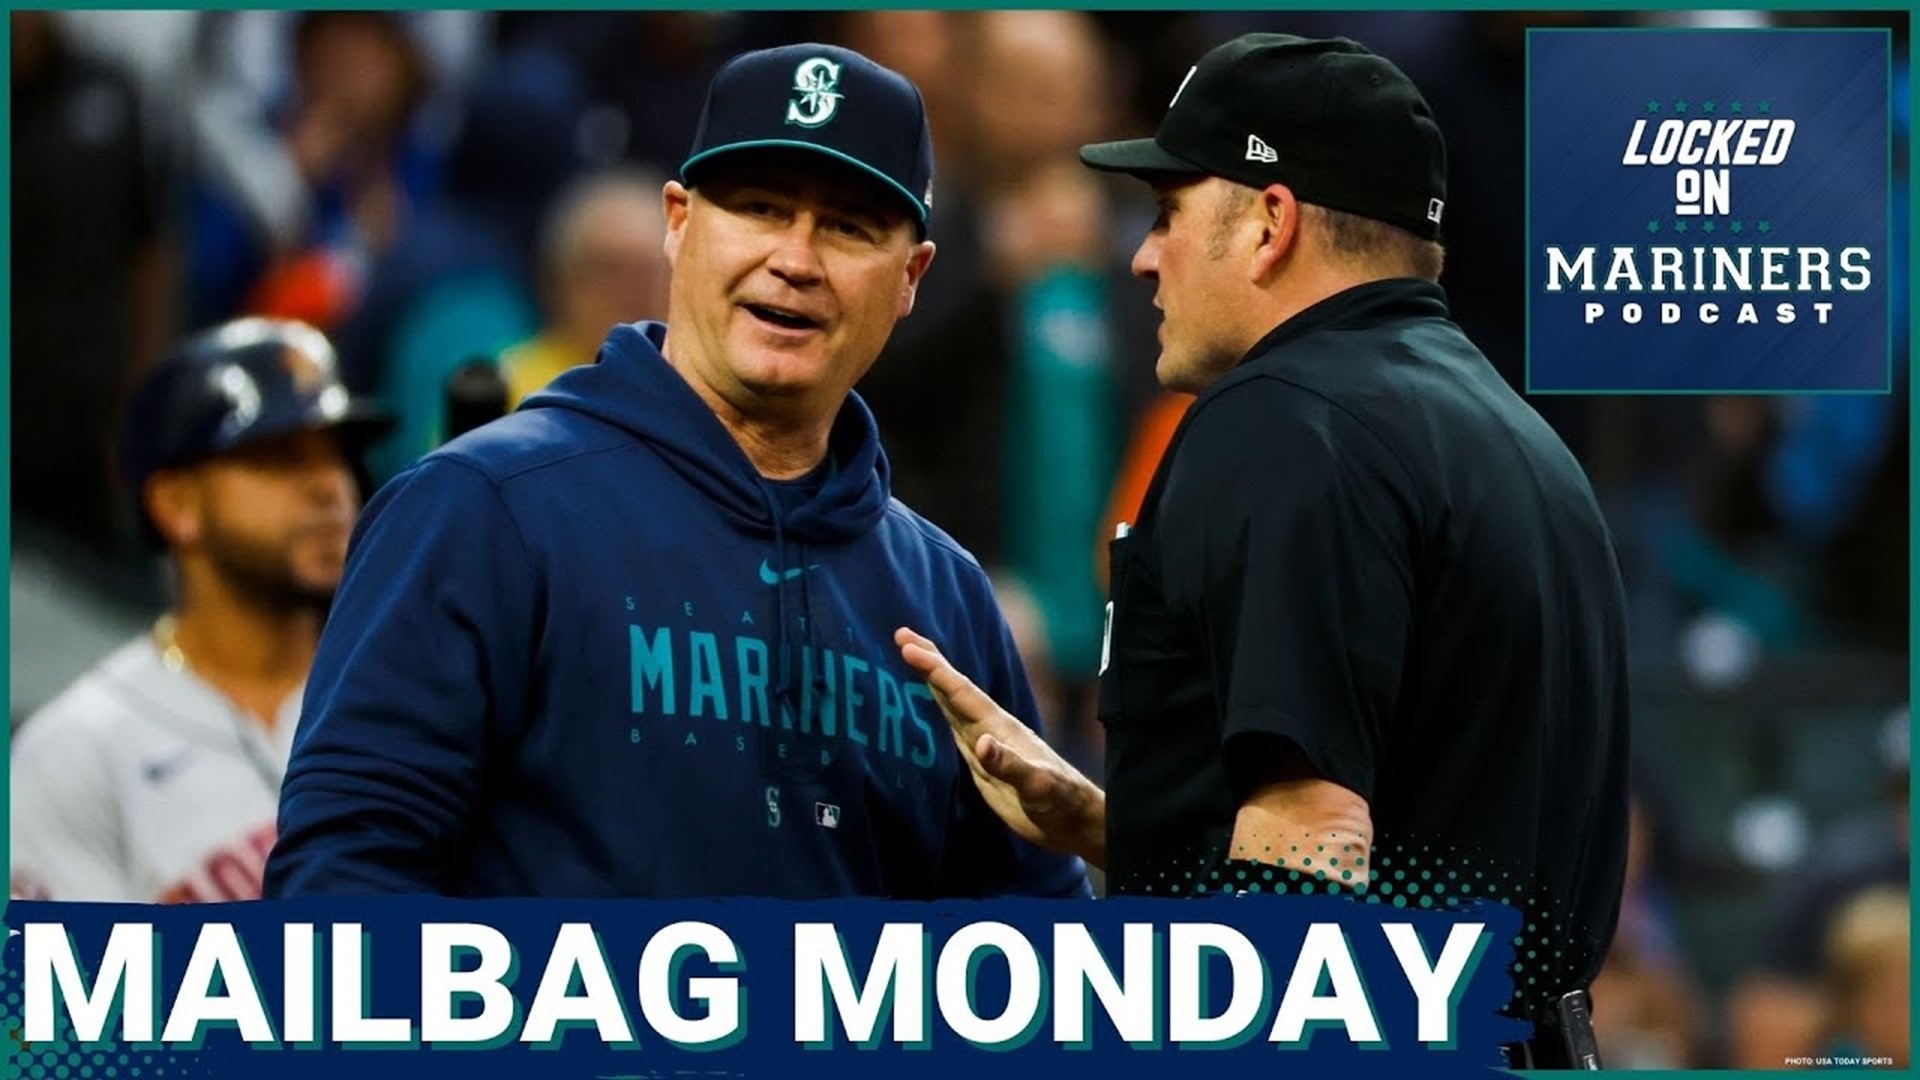 It was another disappointing weekend for the Mariners, so Colby and Ty open up the mailbag to answer your questions.